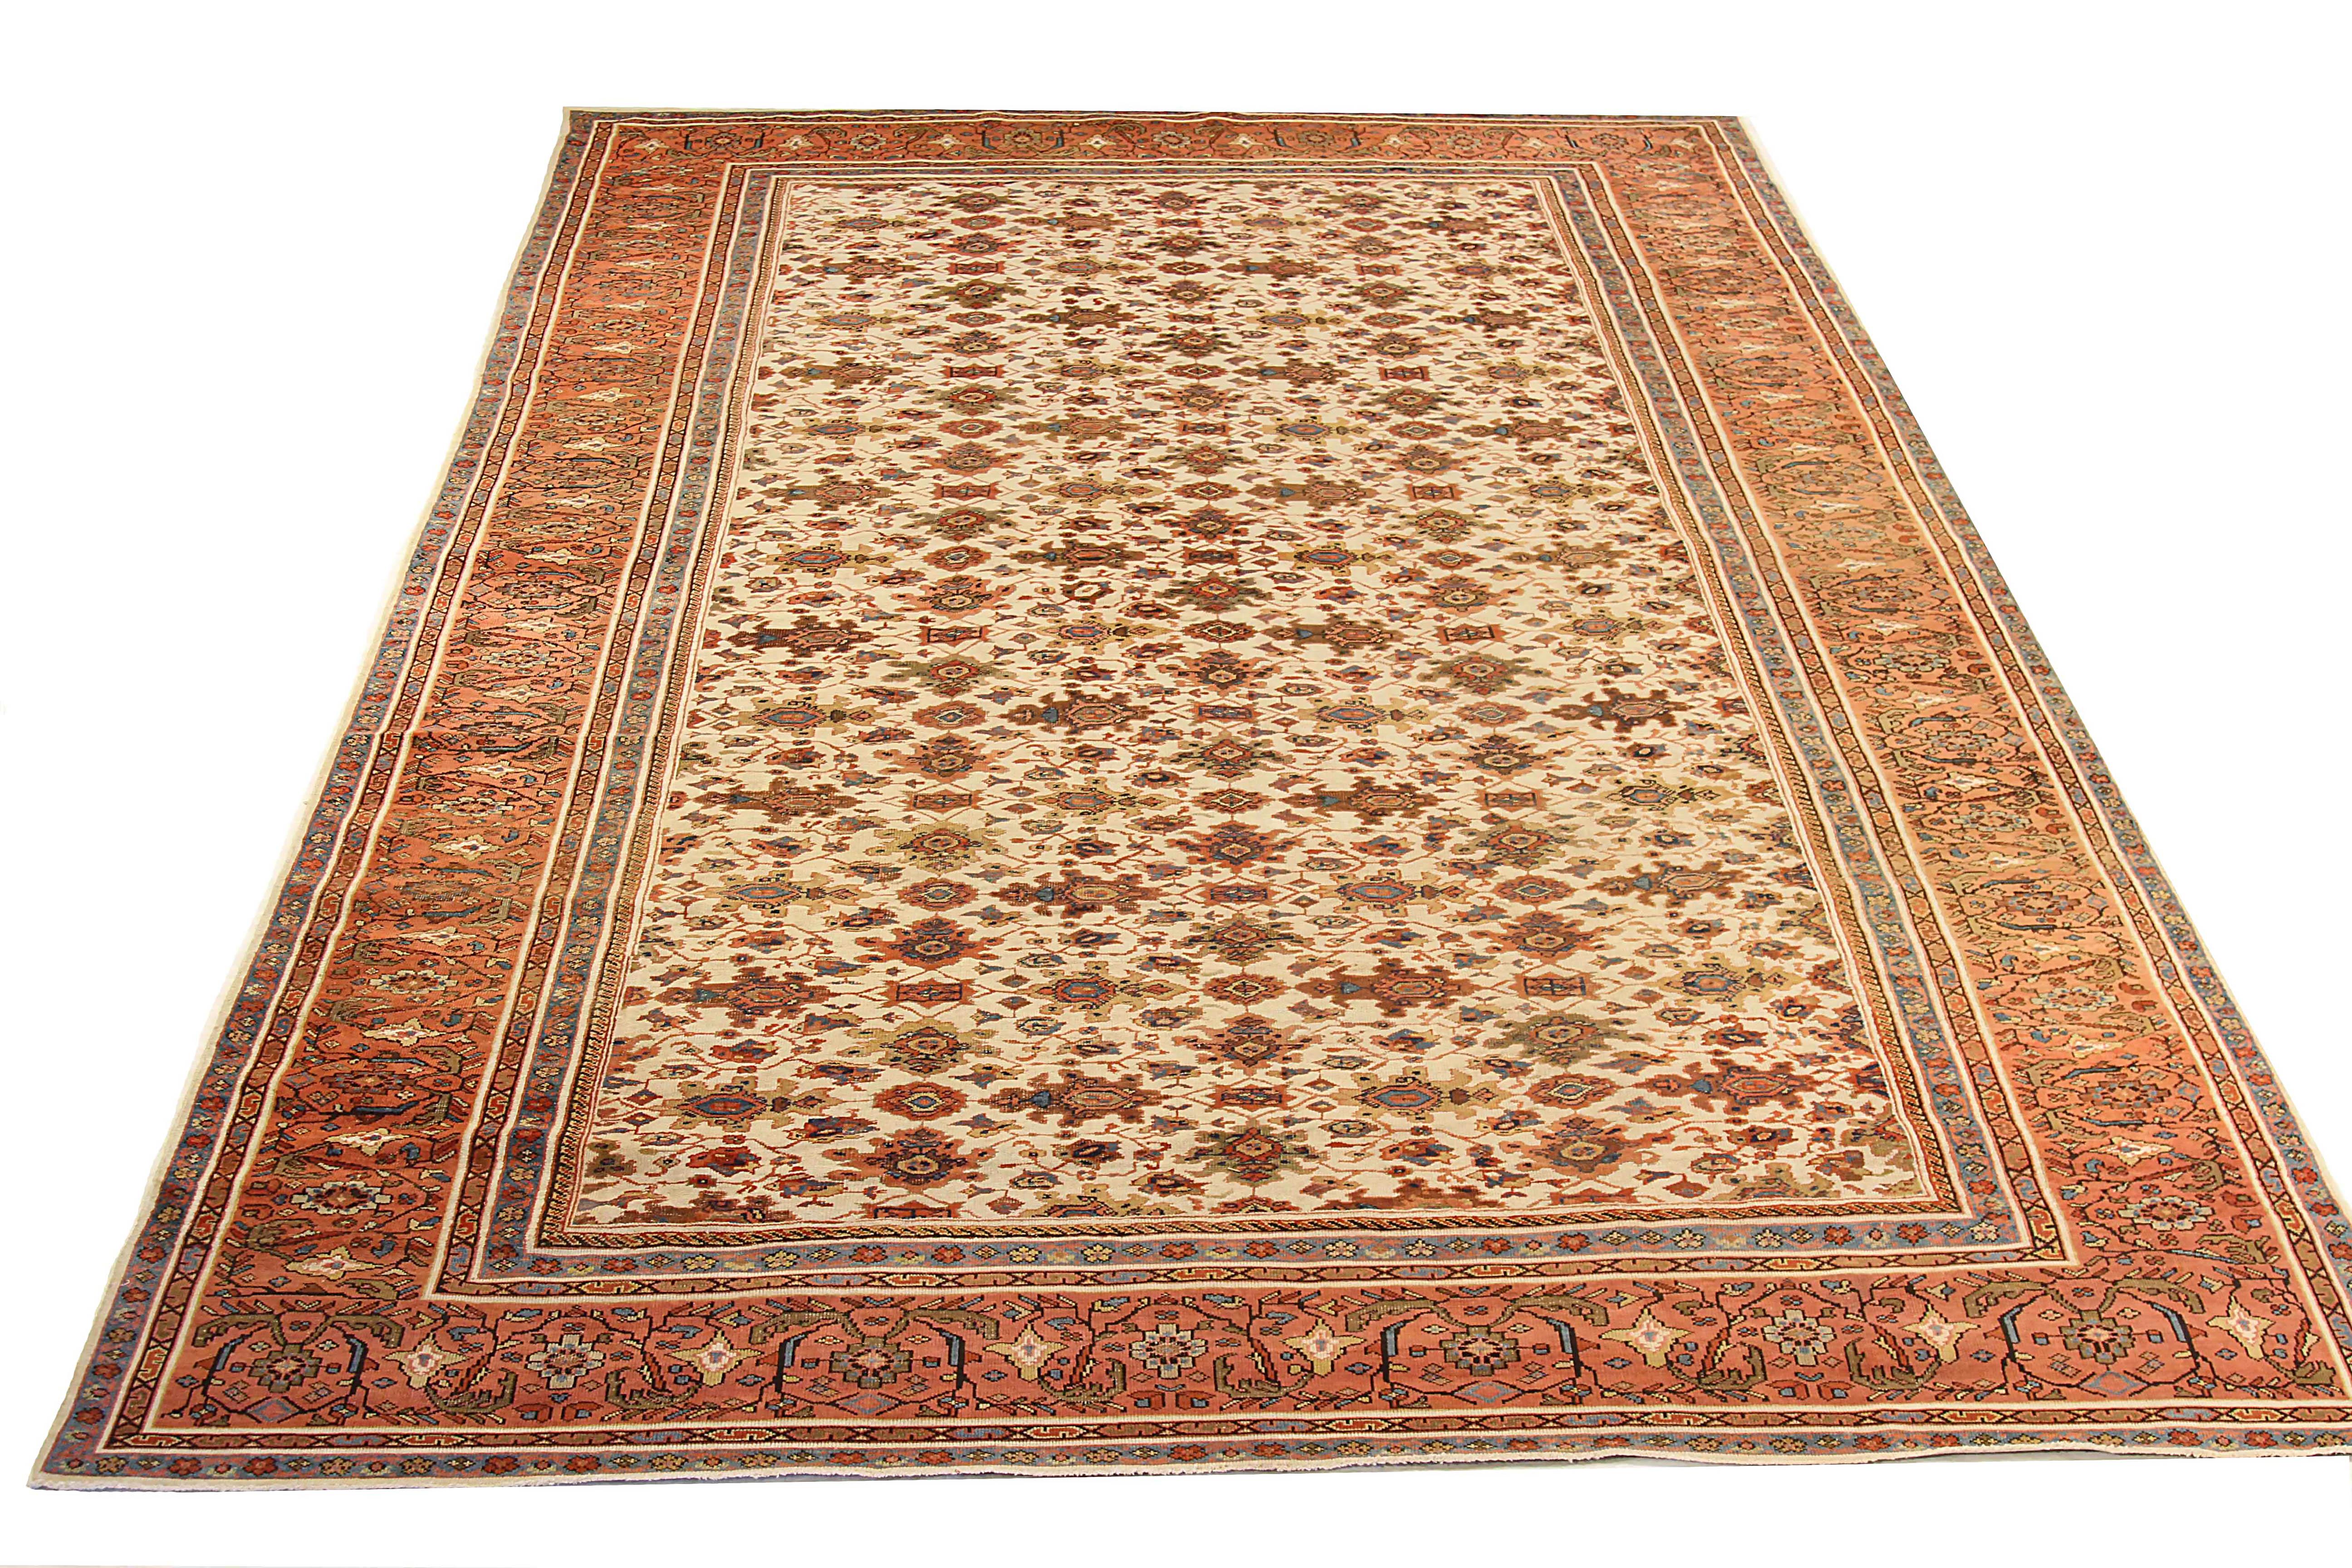 Antique Persian runner rug handmade from the highest quality of sheep wool. It’s colored with eco-friendly vegetable dyes that are safe for humans and pets alike. It’s a traditional Sultanabad design handwoven by expert artisans. It’s a lovely area